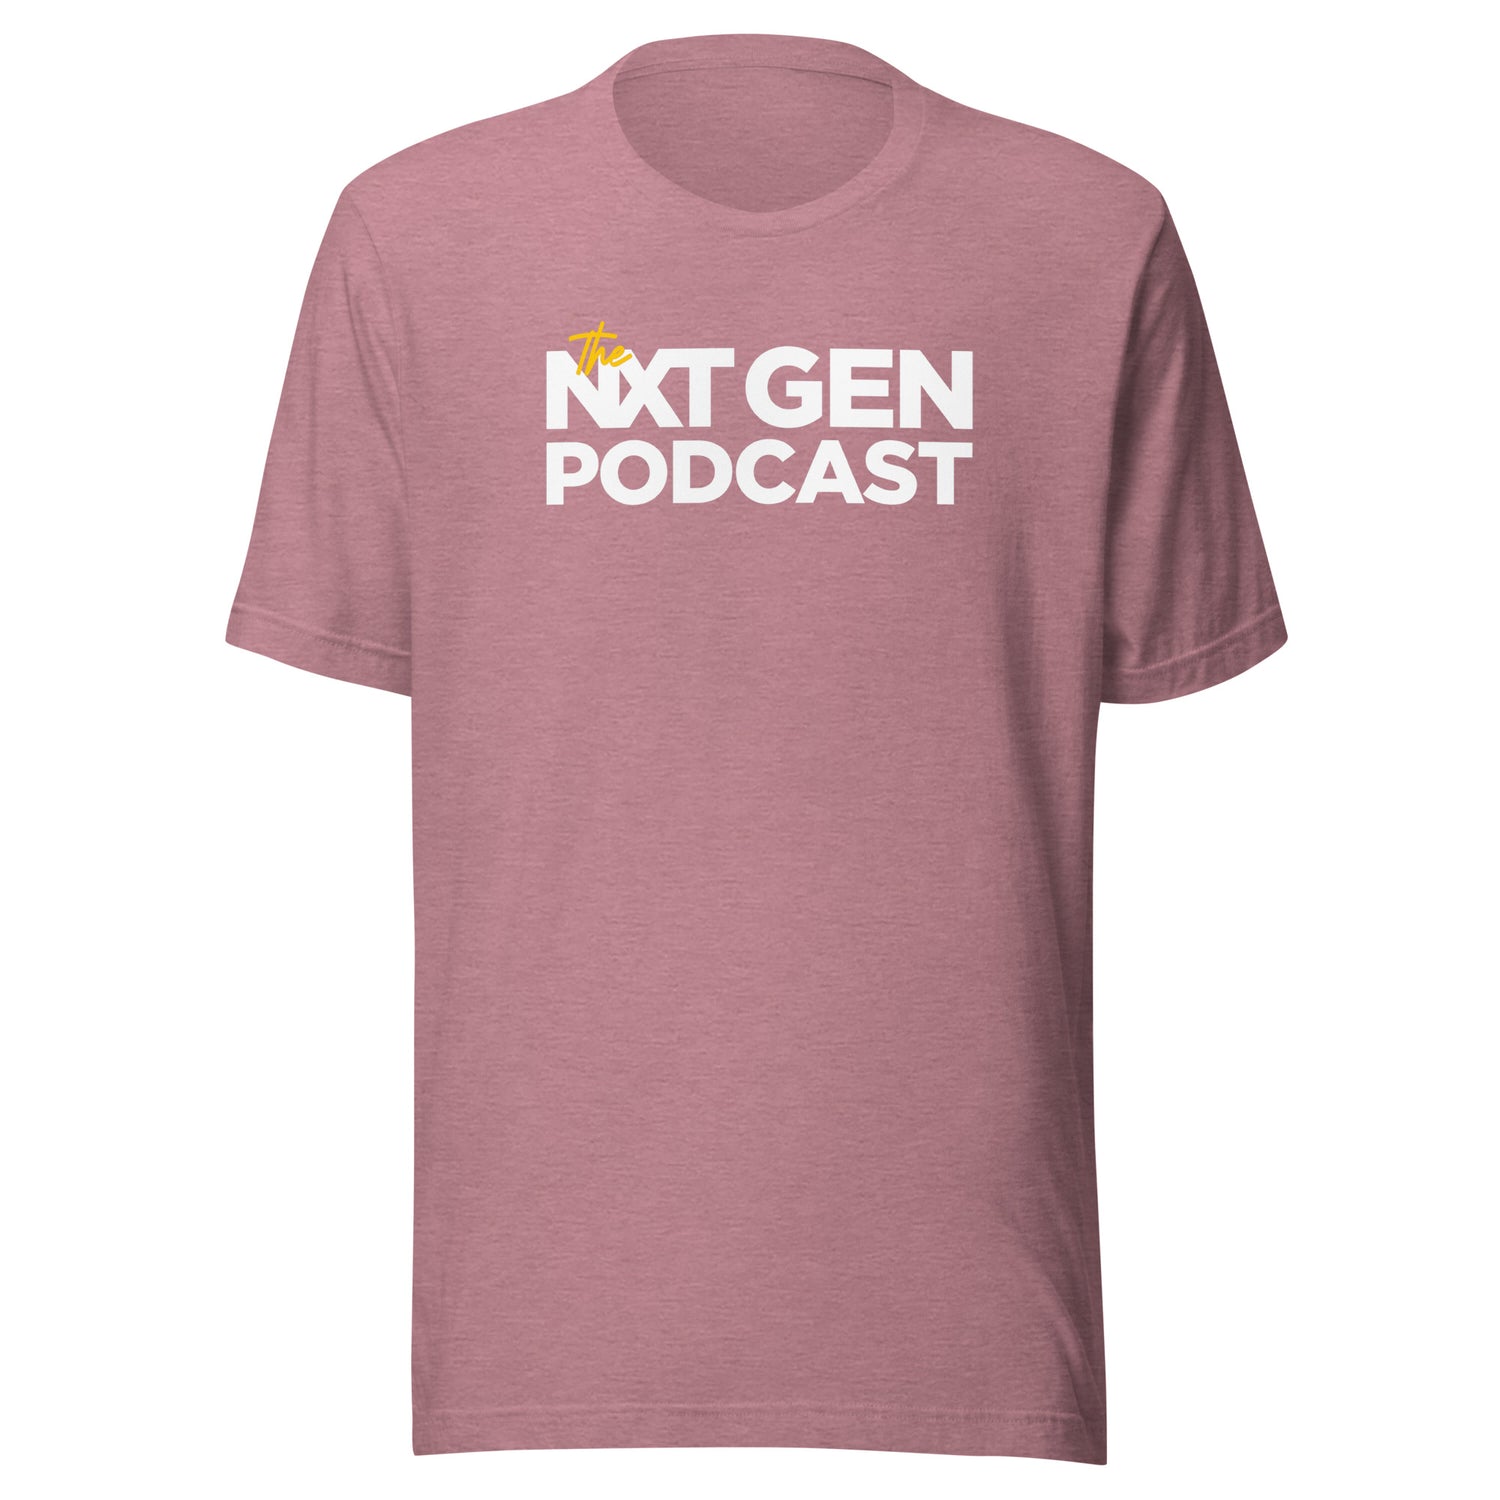 The Nxt Gen Podcast